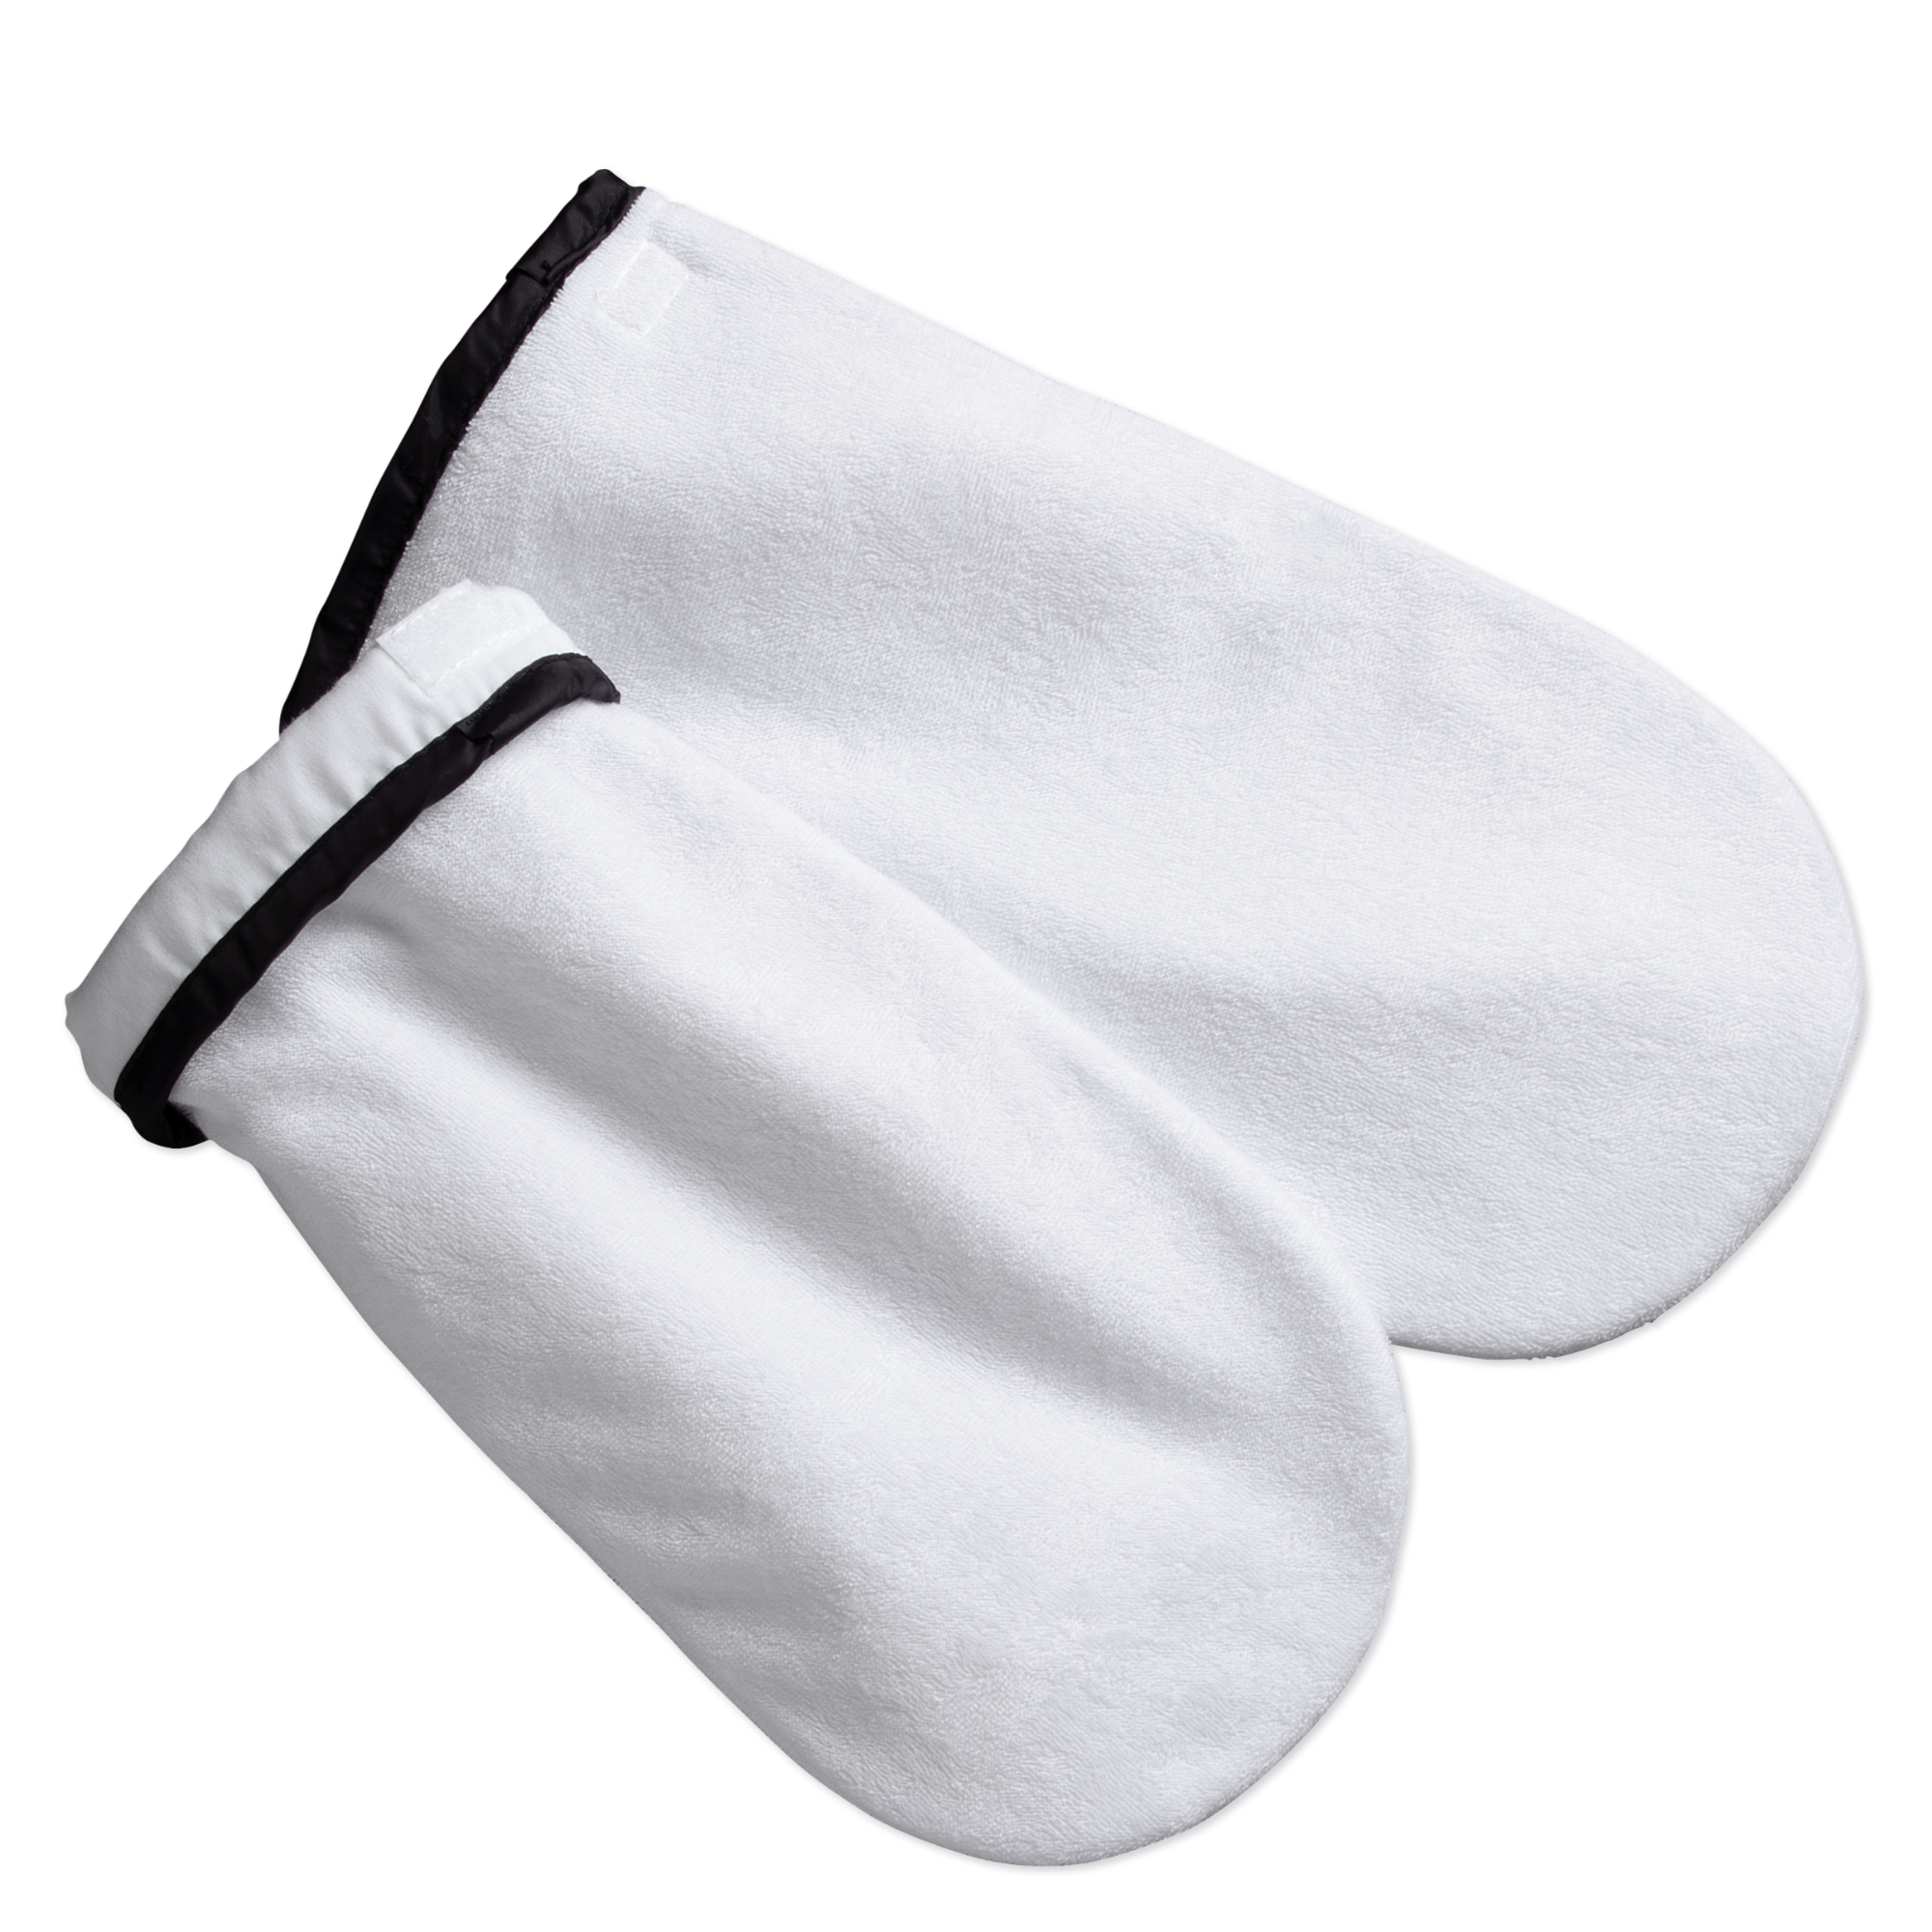 Terry Cloth Antimicrobial Wash Mitts